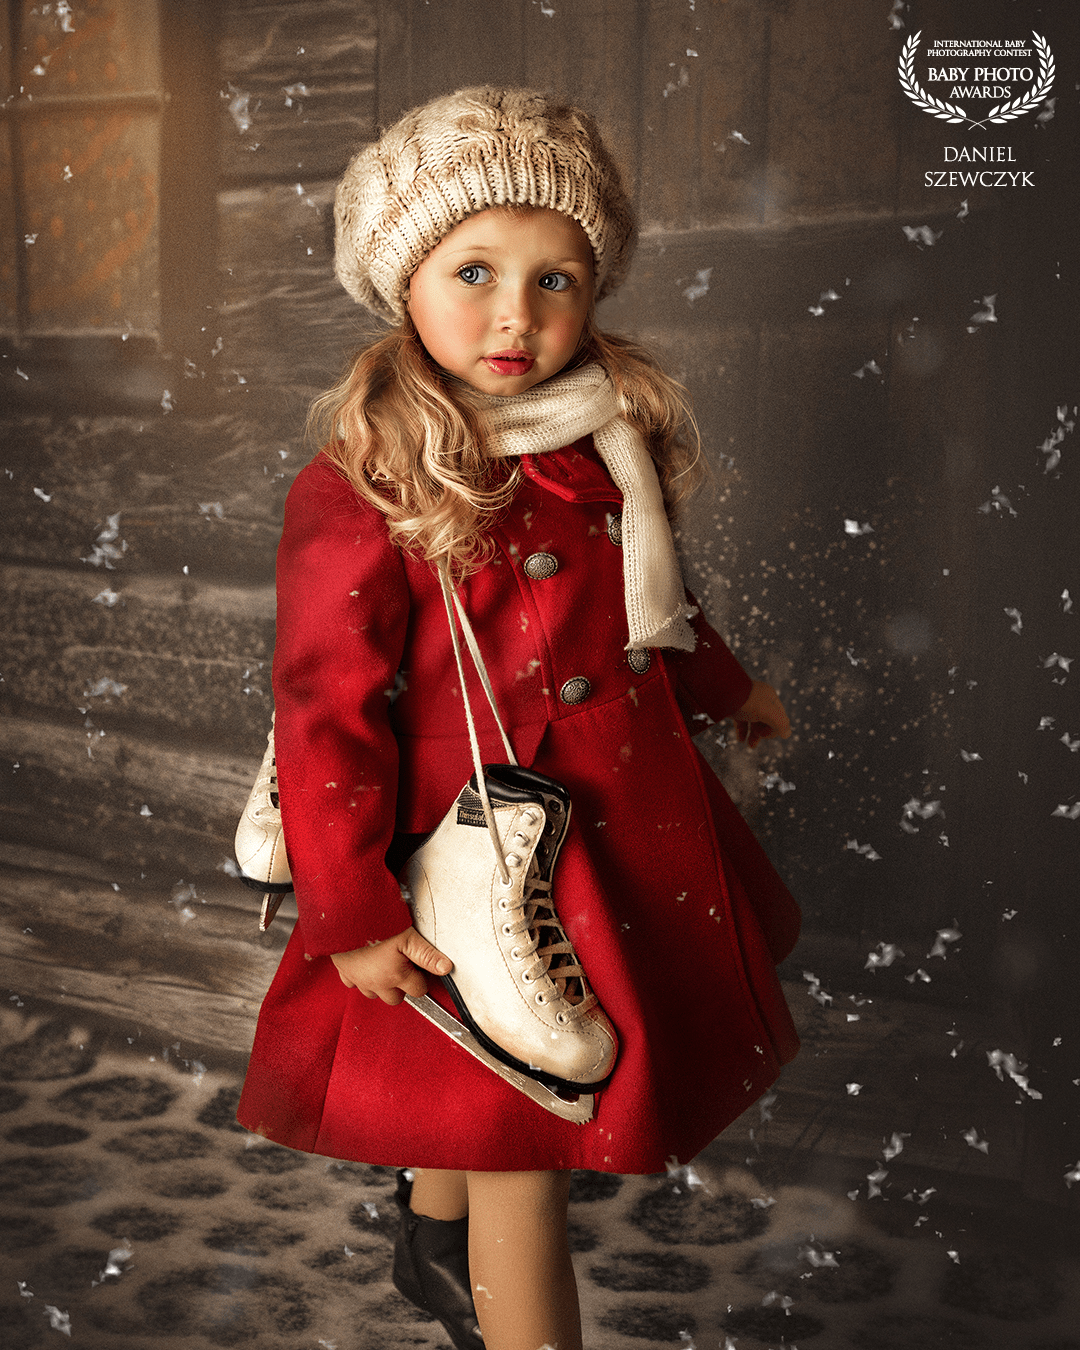 This particular photo was the last one of the xmas serie, unexpected snapshot turned into our favourite photo,  her eyes tell everything...)))